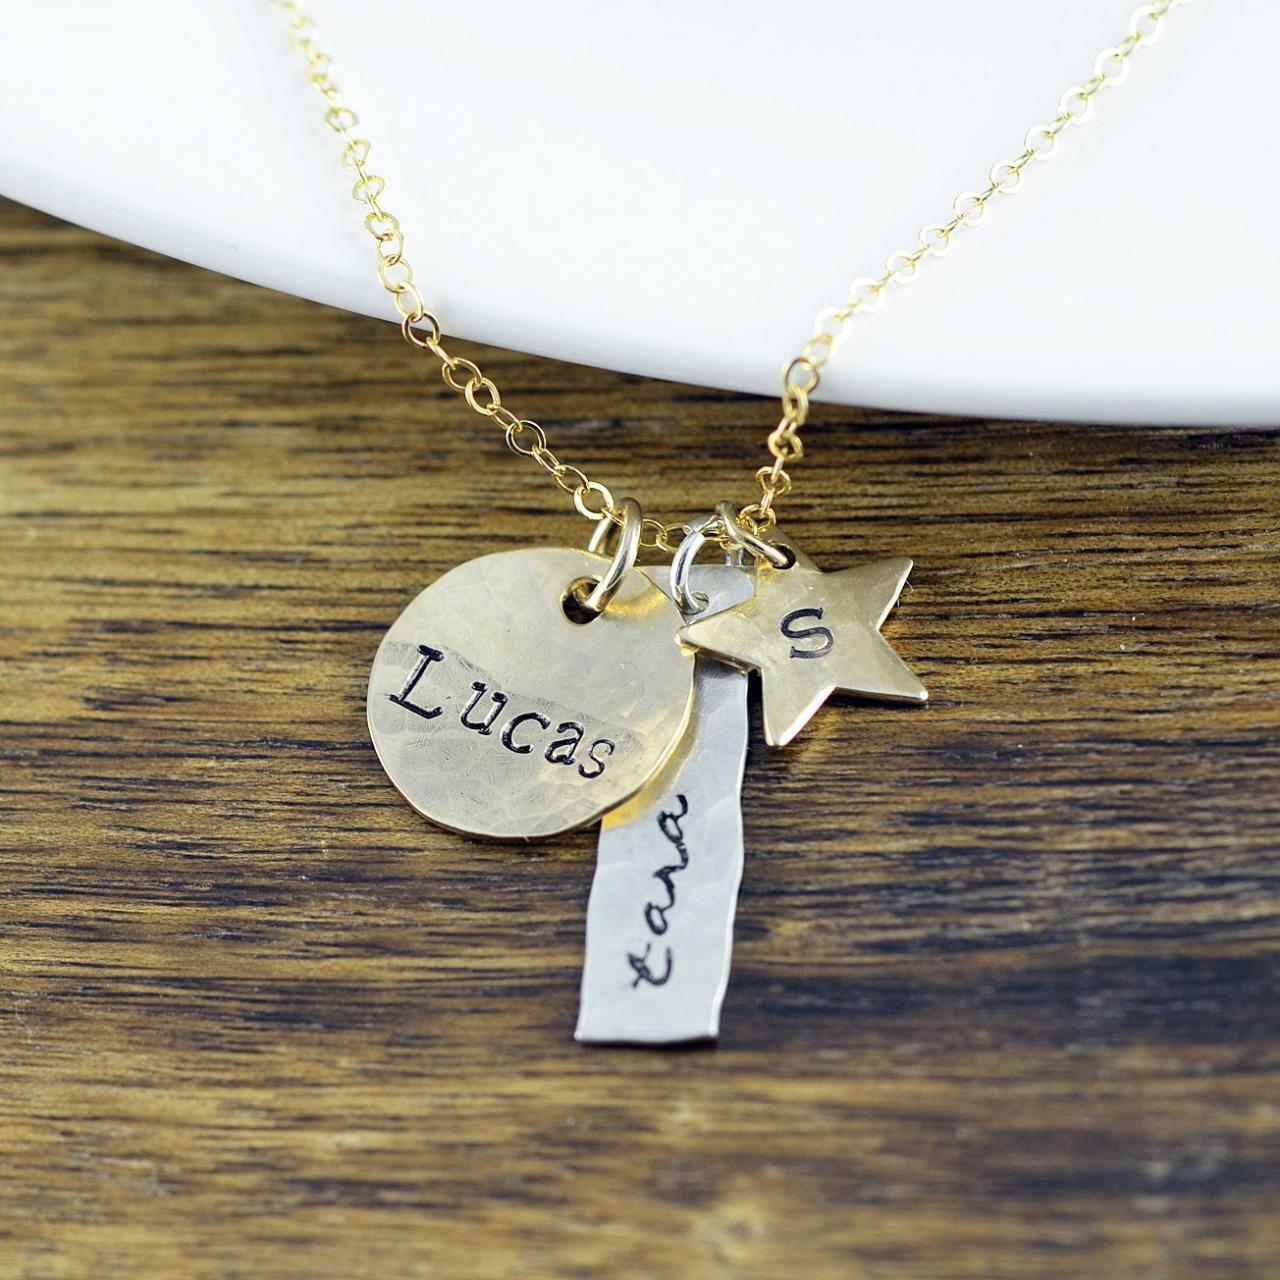 Mother's Necklace, Mom Jewelry, Kids Name Necklace, Name Necklace, Custom Stamped Necklace, Mothers Jewelry, Hand Stamped Necklace